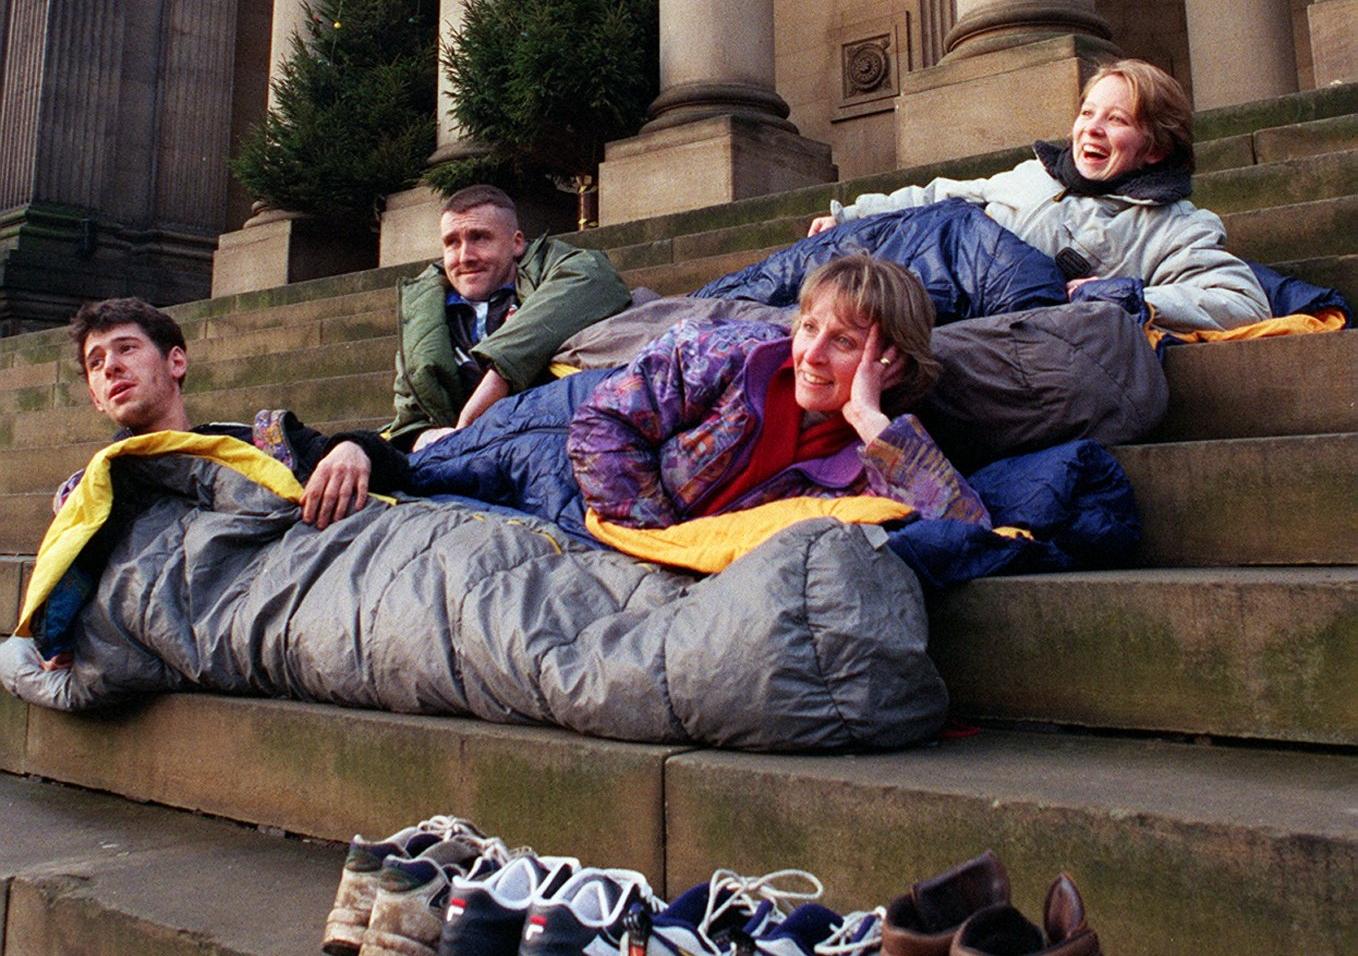 Members of Cookridge-based charity Caring for Life slept out overnight on the steps of Leeds Town Hall to raise money for the homeless. Pictured are Sue Hoey, Brain Batley, Lis Wilcox and Daniel Vazquez.